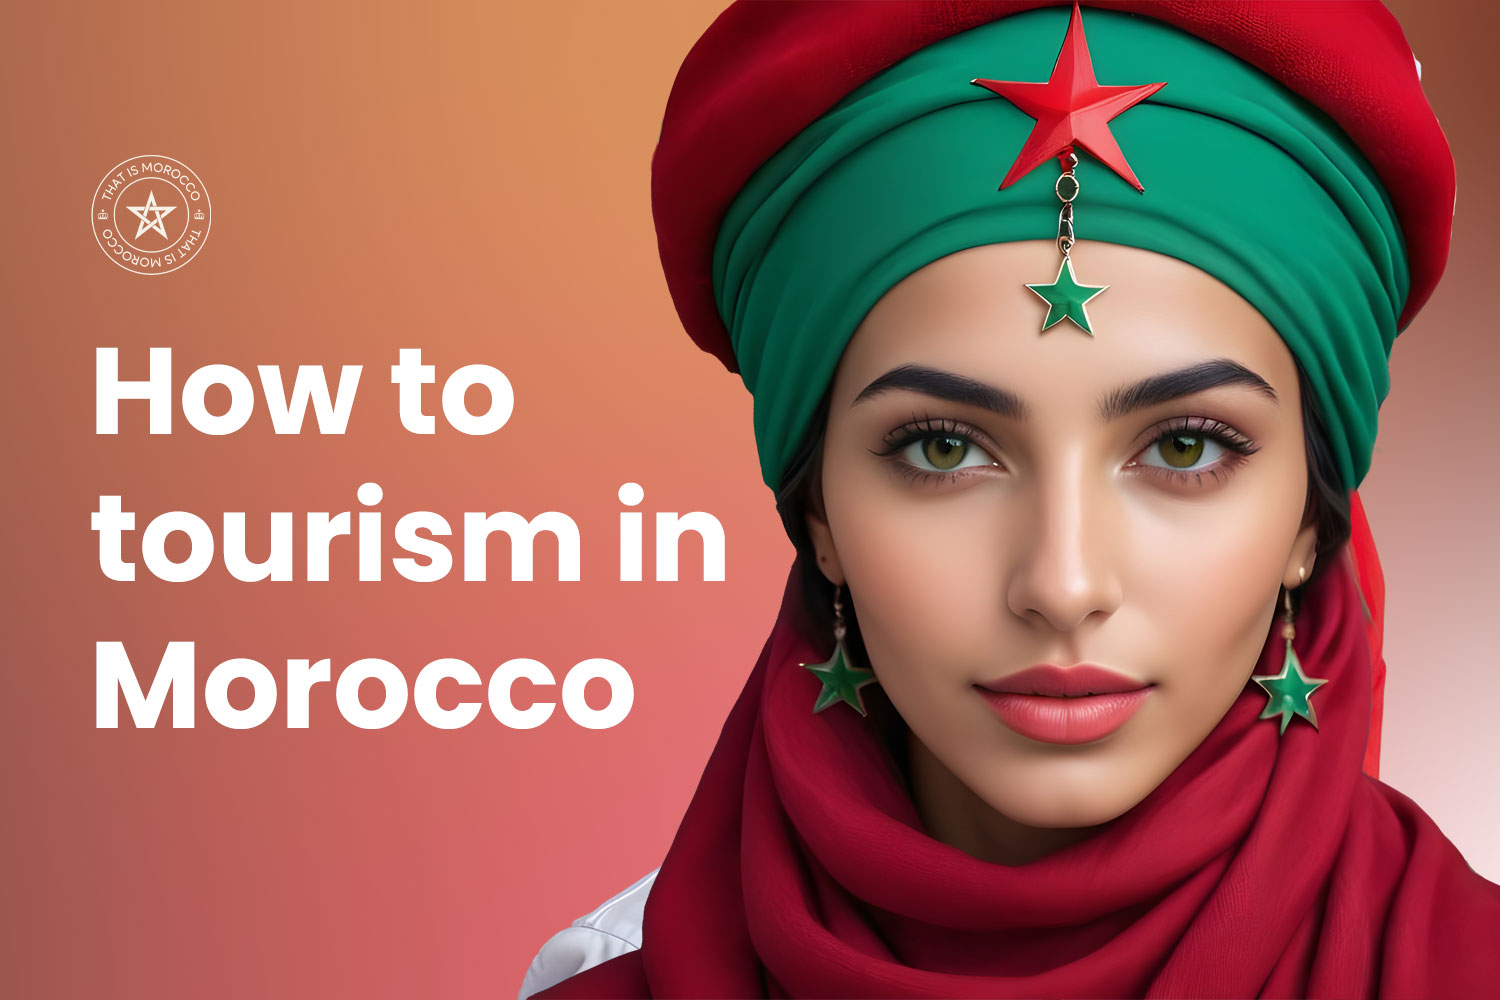 How to tourism in Morocco